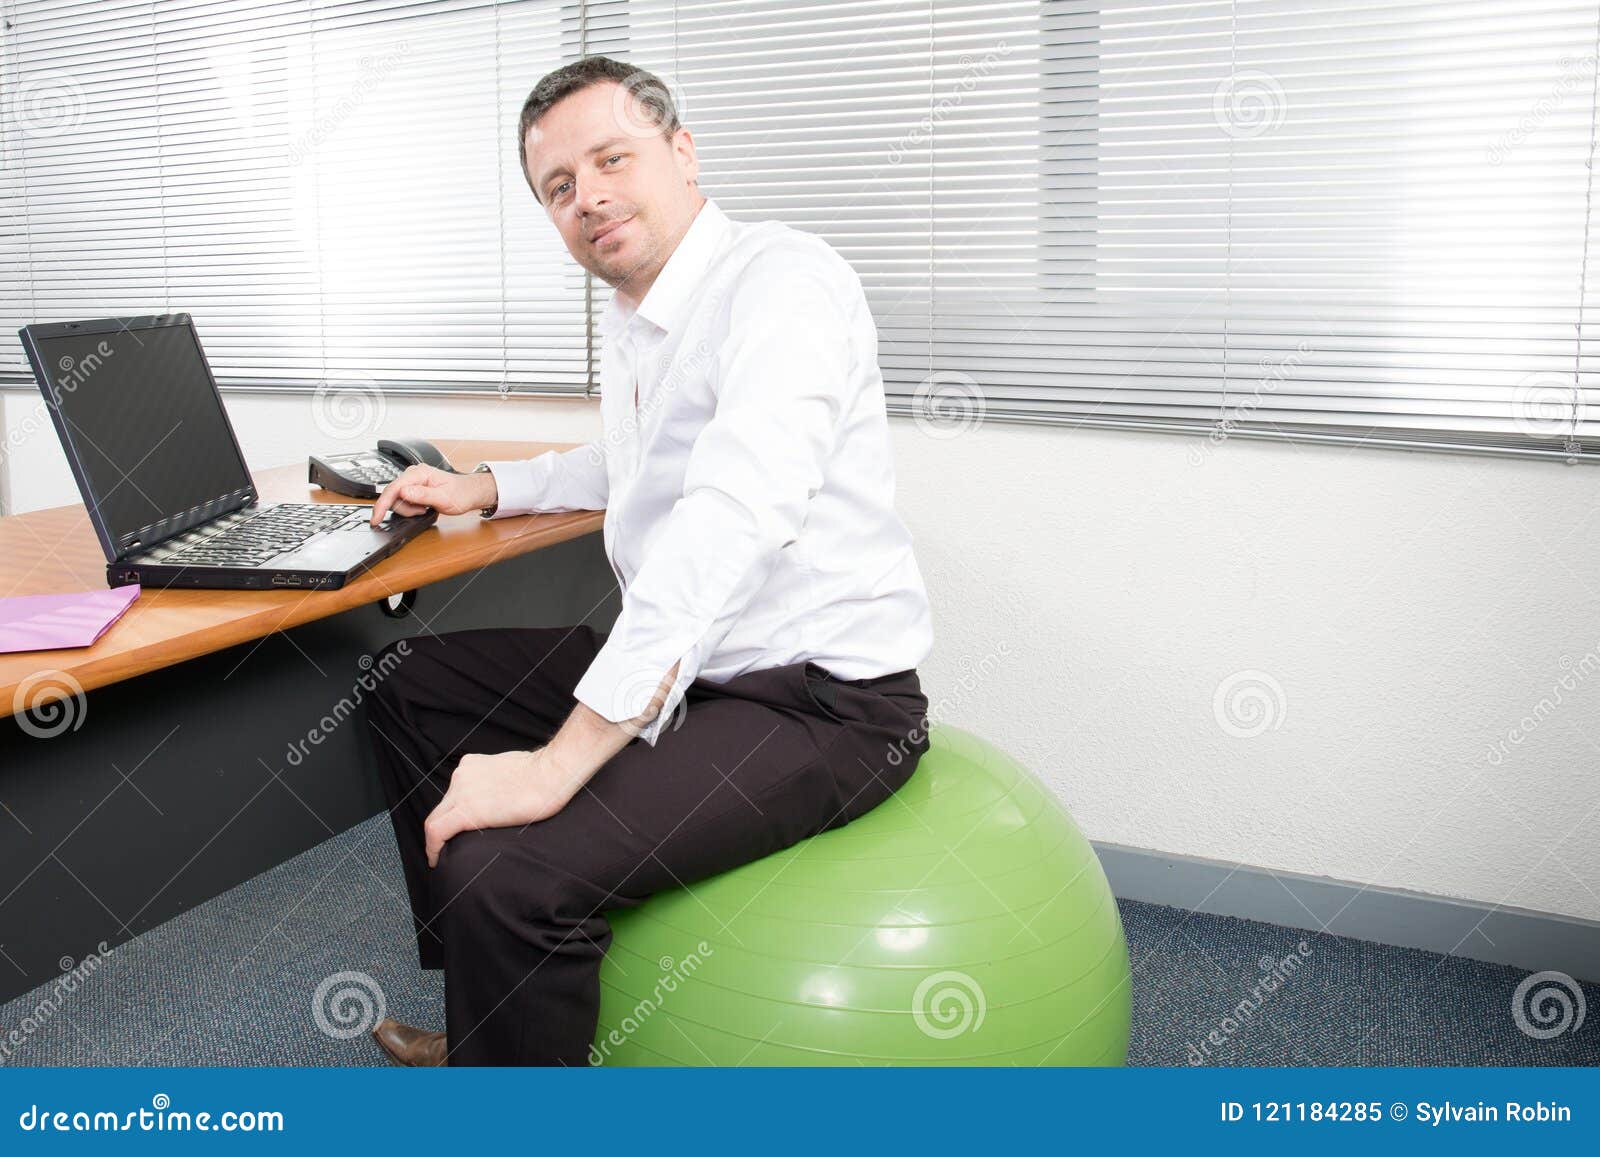 Businessman Sitting On Exercise Balloon At Desk Ball Seat Office